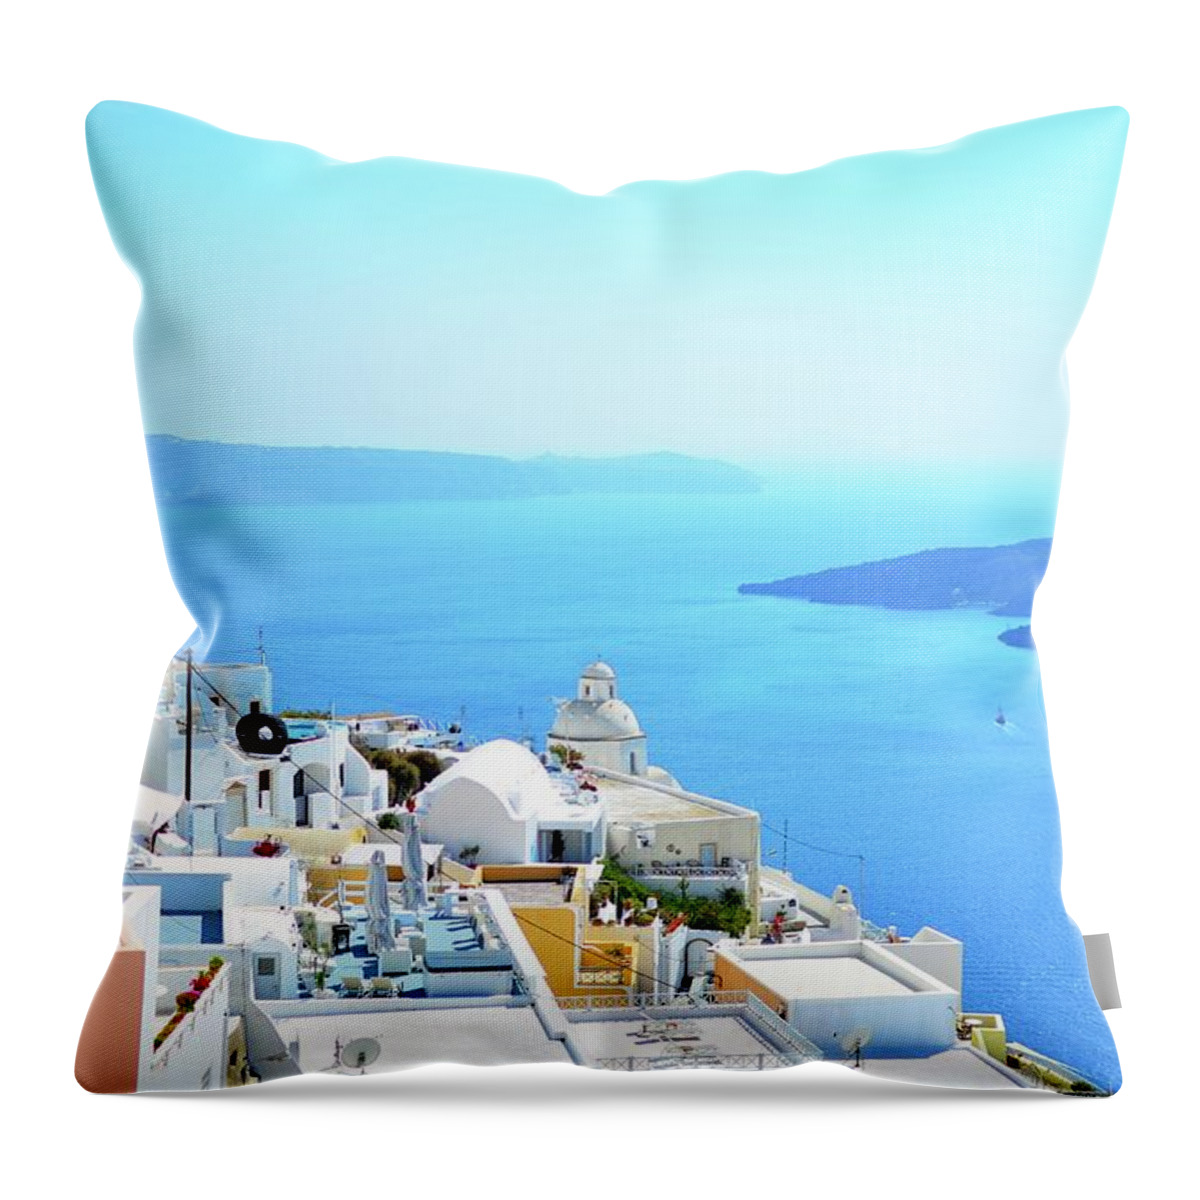 Tranquility Throw Pillow featuring the photograph Oia Village by Bharat